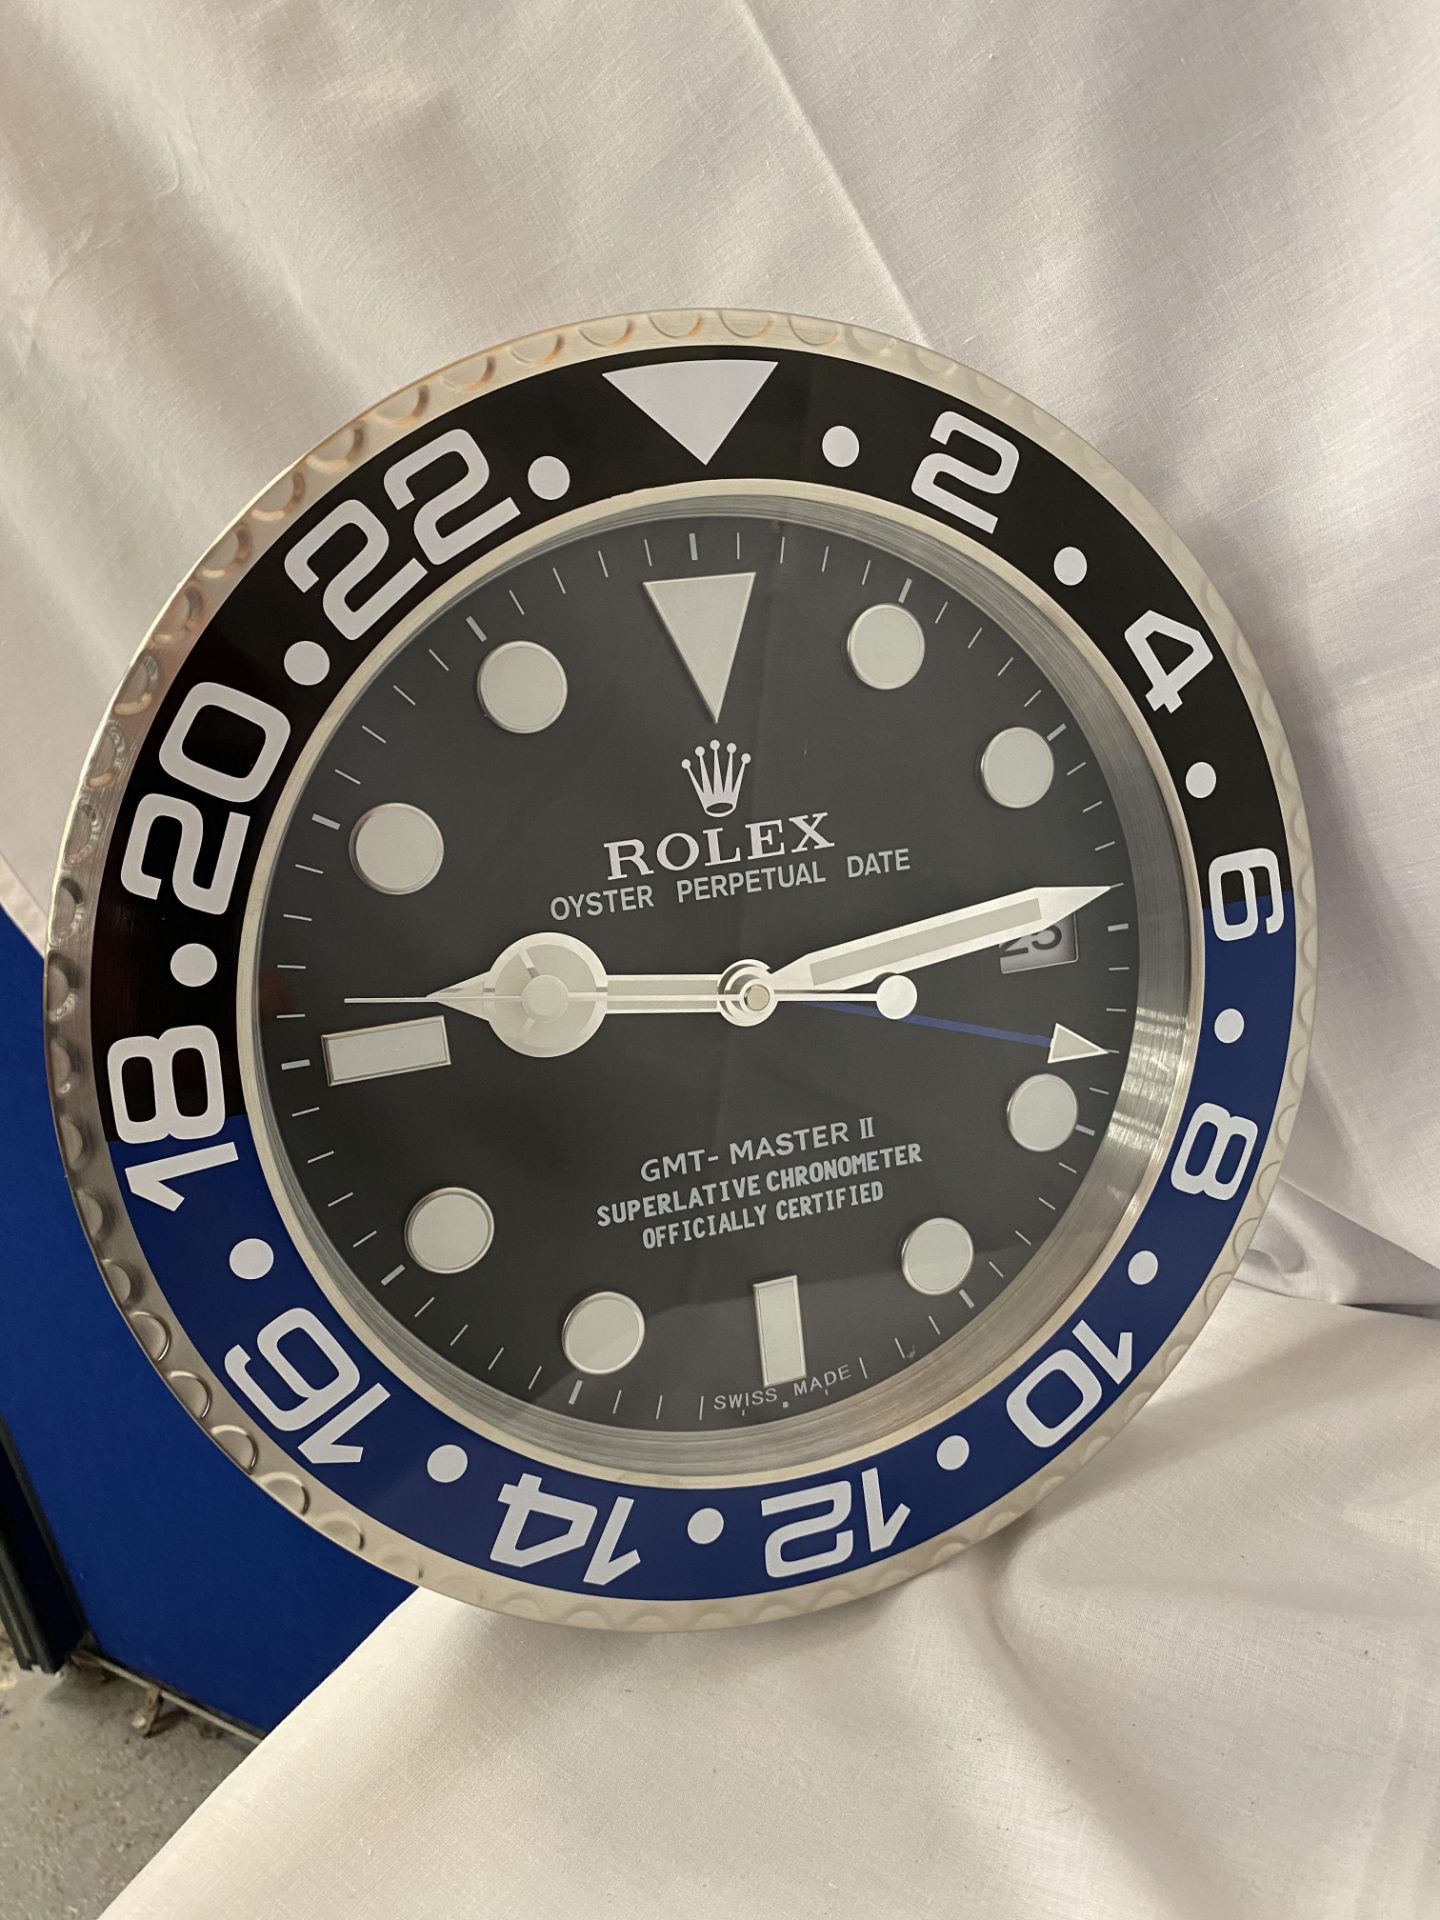 A METAL SILVER AND BLUE WALL CLOCK DIPICTING A ROLEX OYSTER FACE